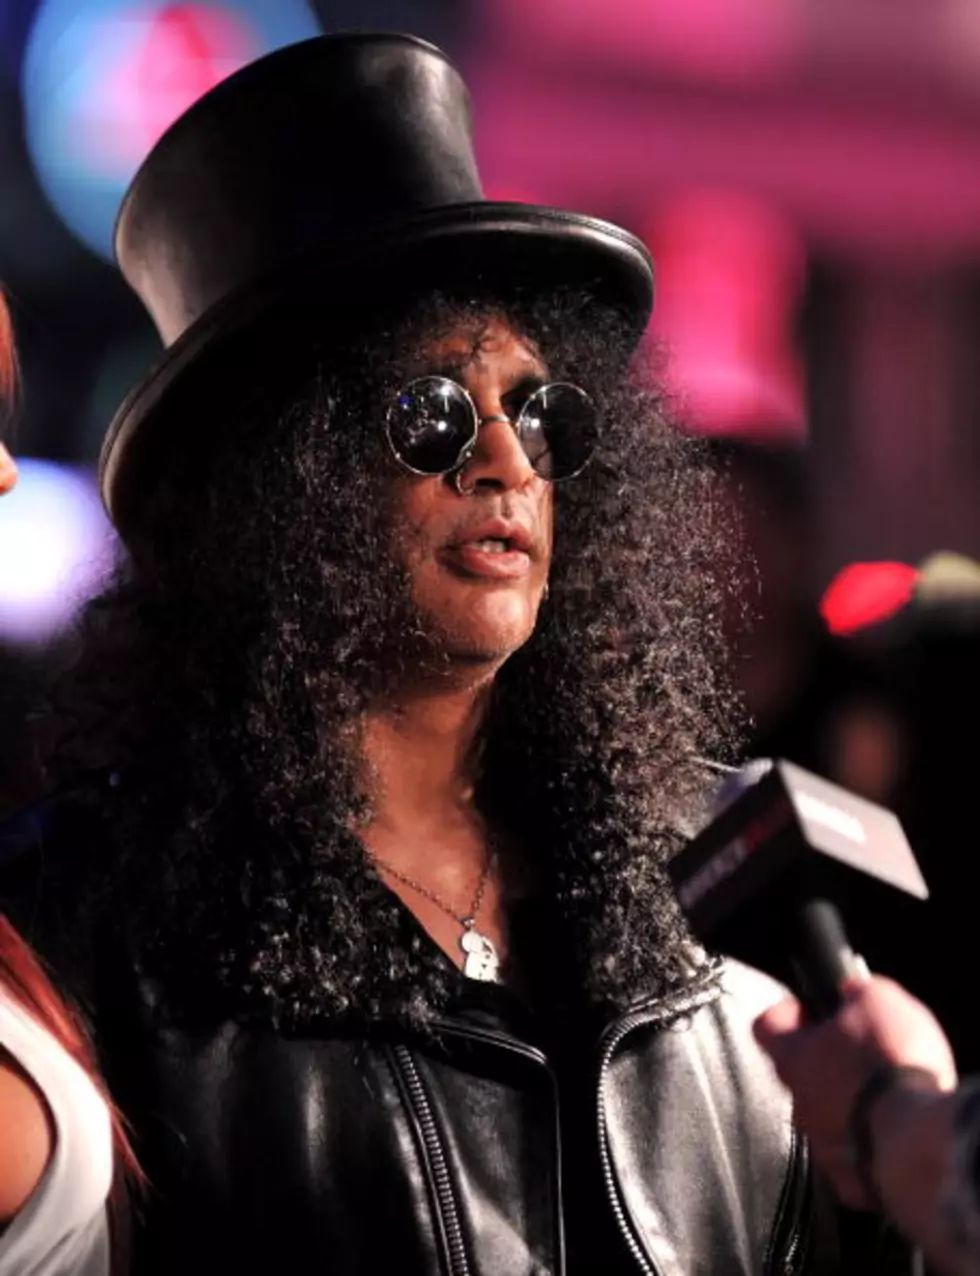 Who Does Slash Think of as &#8220;Rock &#8216;n&#8217; Roll&#8221;?